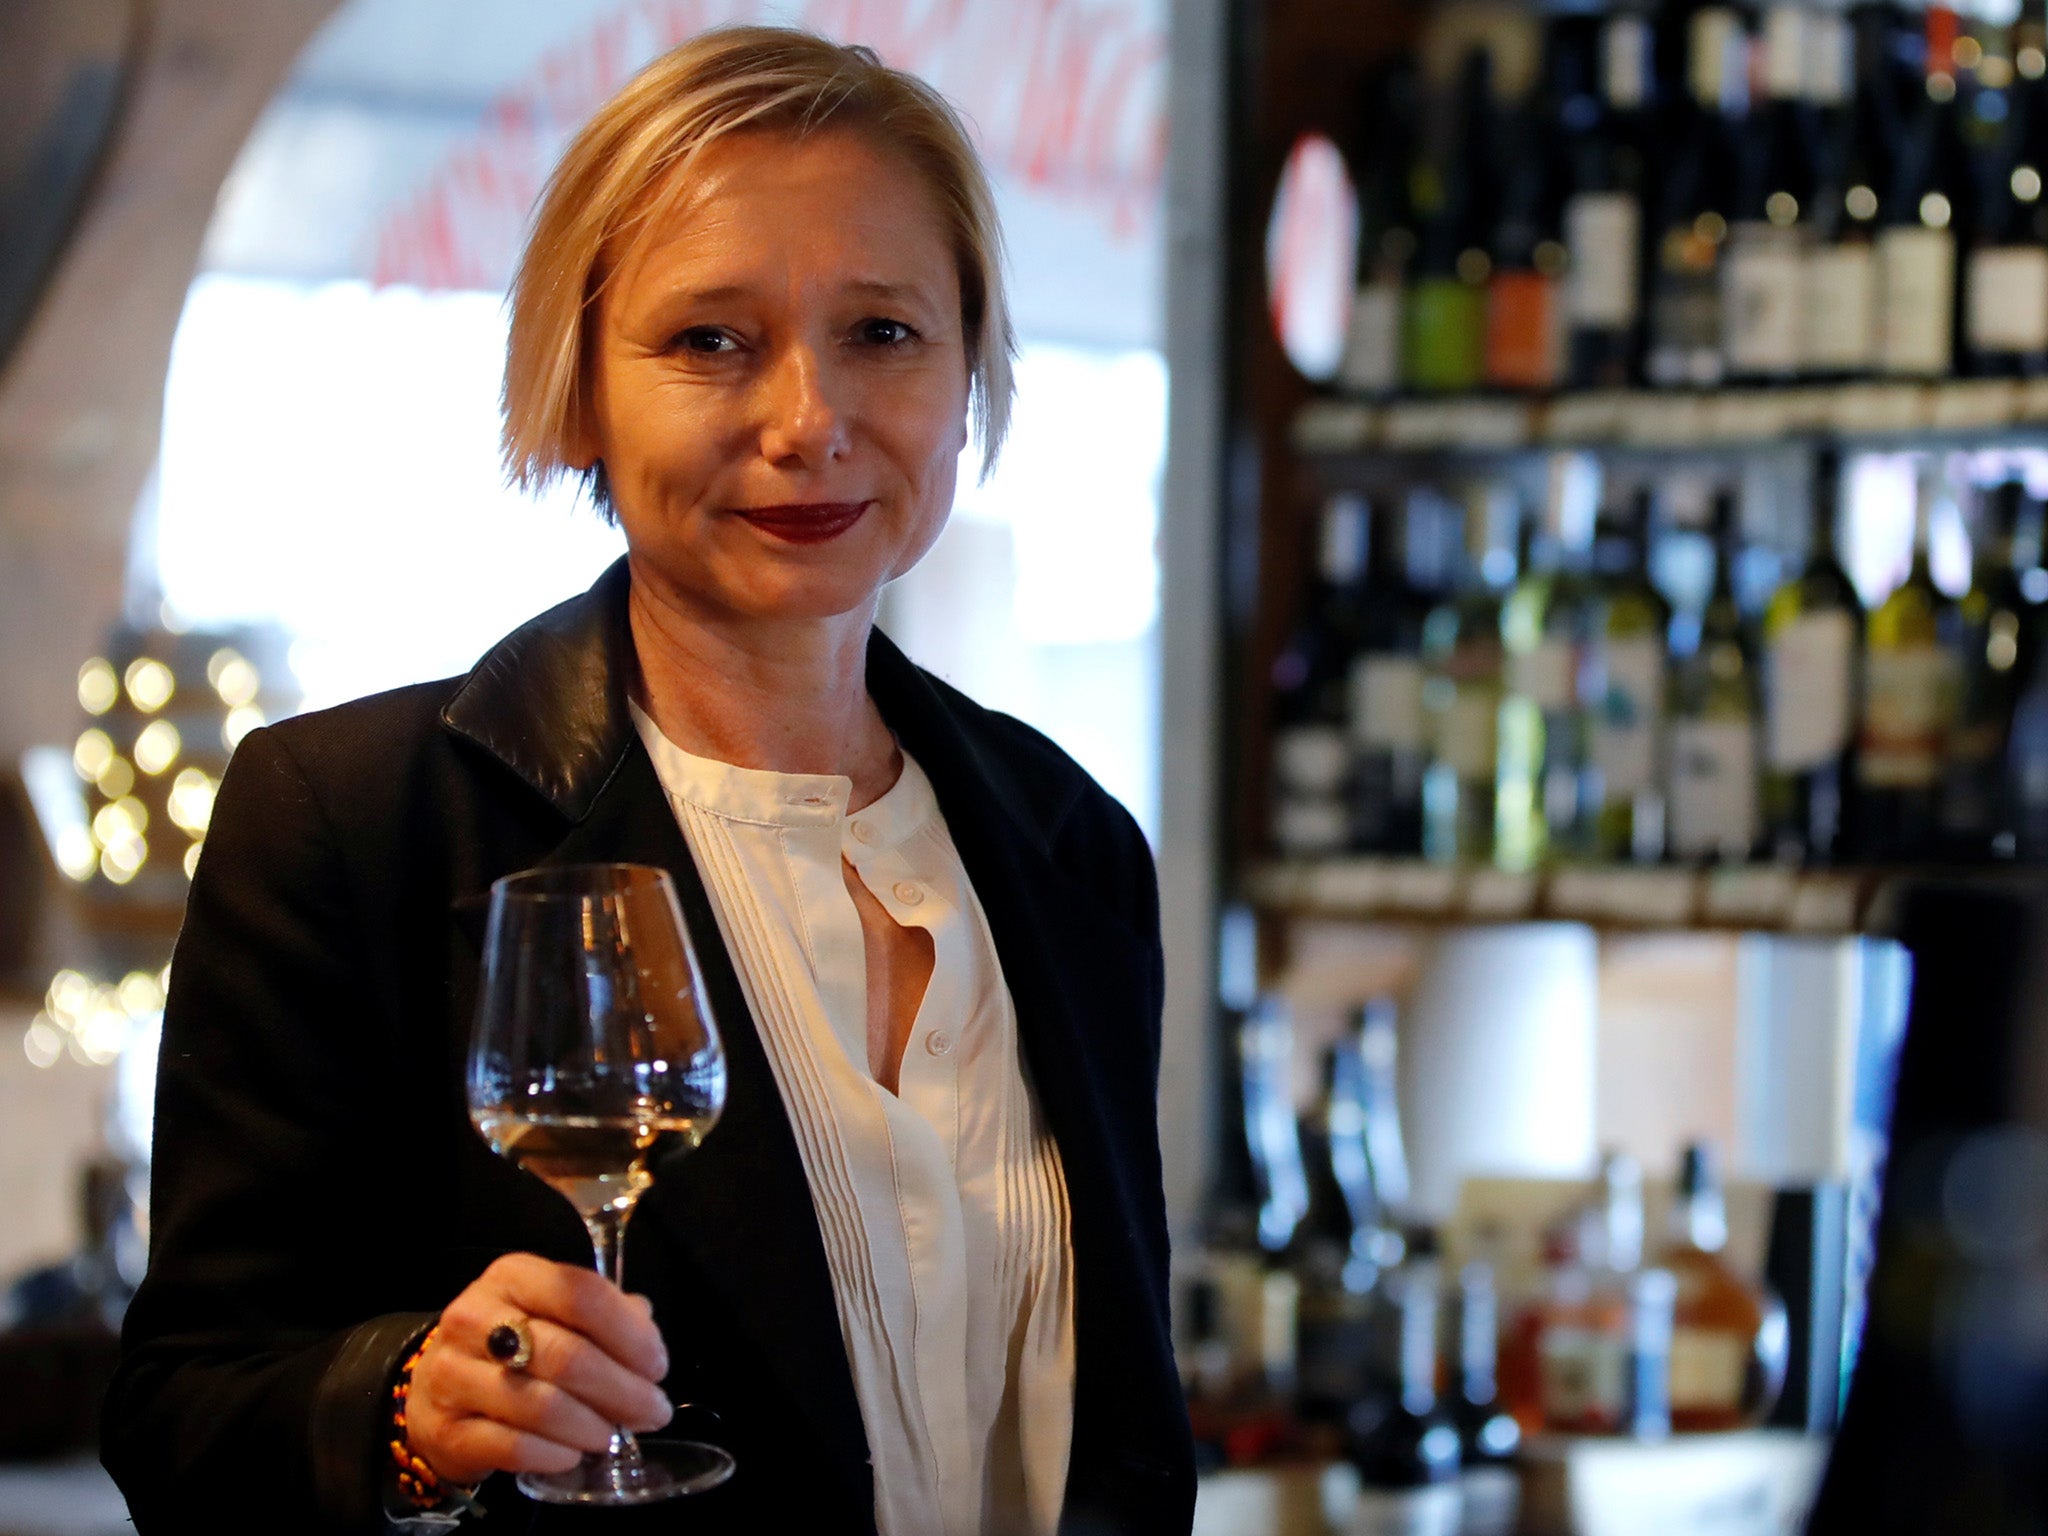 On the nose: French oenologist Sophie Pallas lost her sense of taste and smell after been infected with the coronavirus